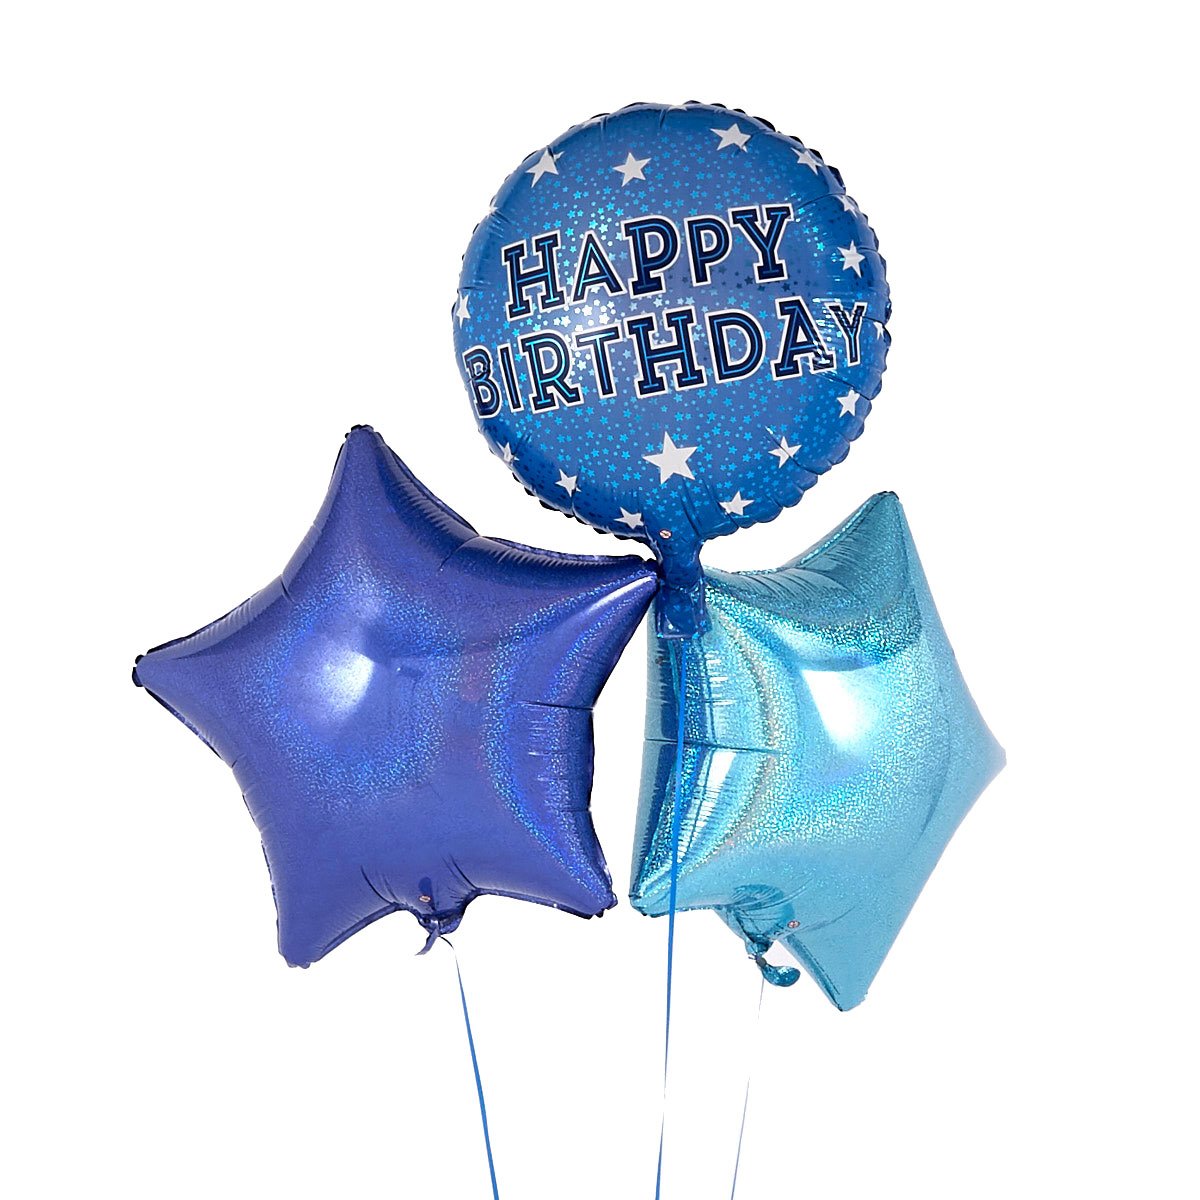 Happy Birthday Blue Balloon Bouquet - DELIVERED INFLATED!